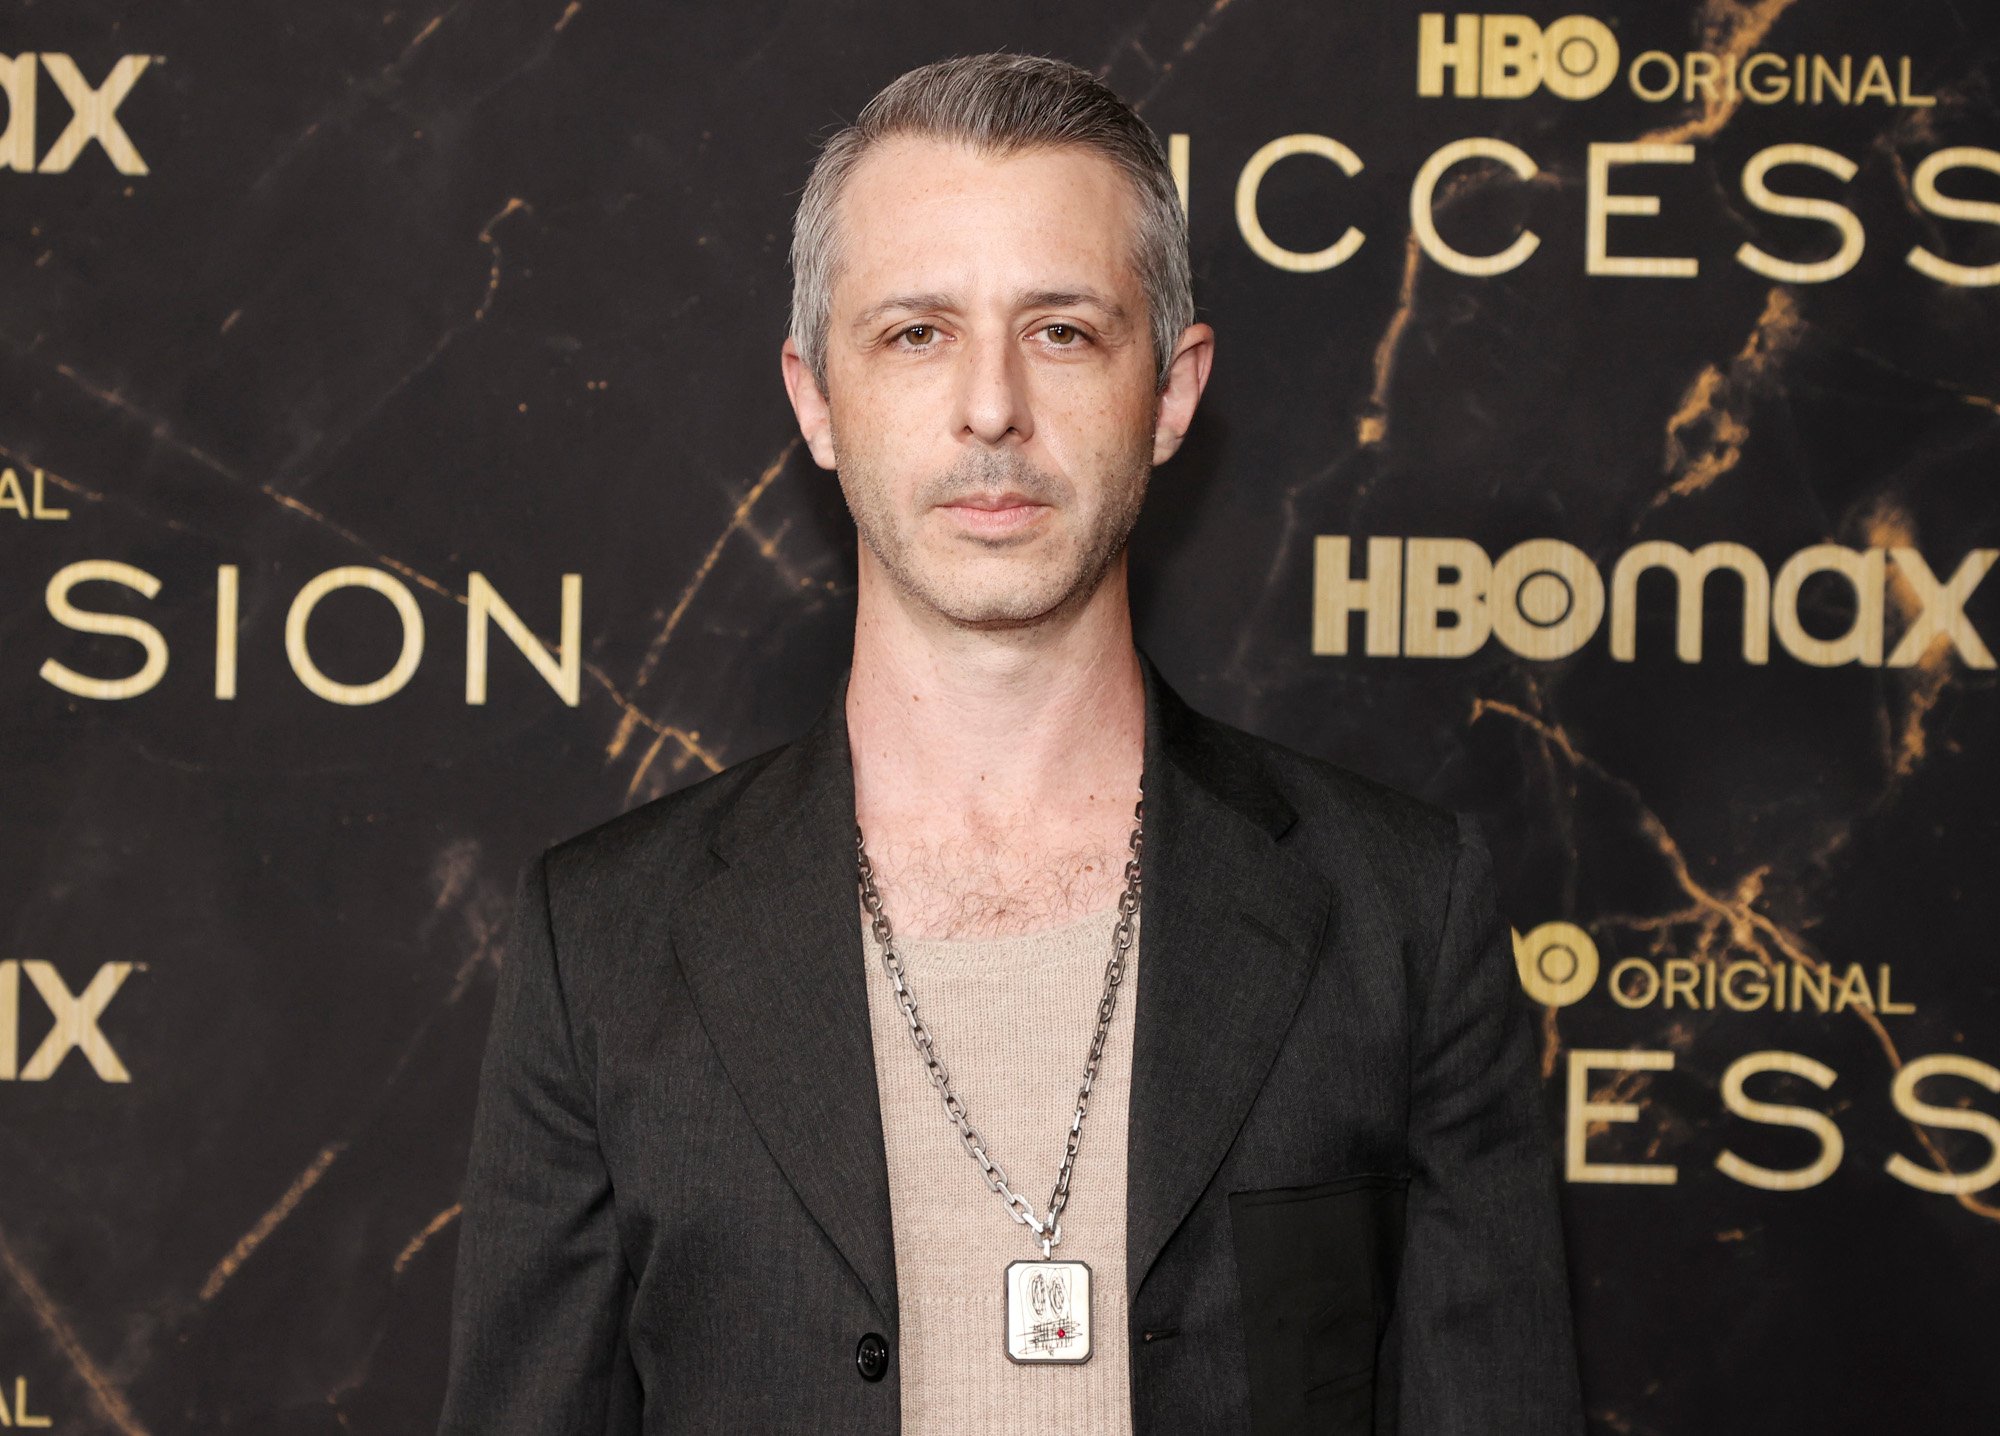 'Succession' star Jeremy Strong a tan shirt, black jacket, and gold chain. He's standing in front of a wall that says 'HBO Max' and 'Succession,' and he's looking directly at the camera.